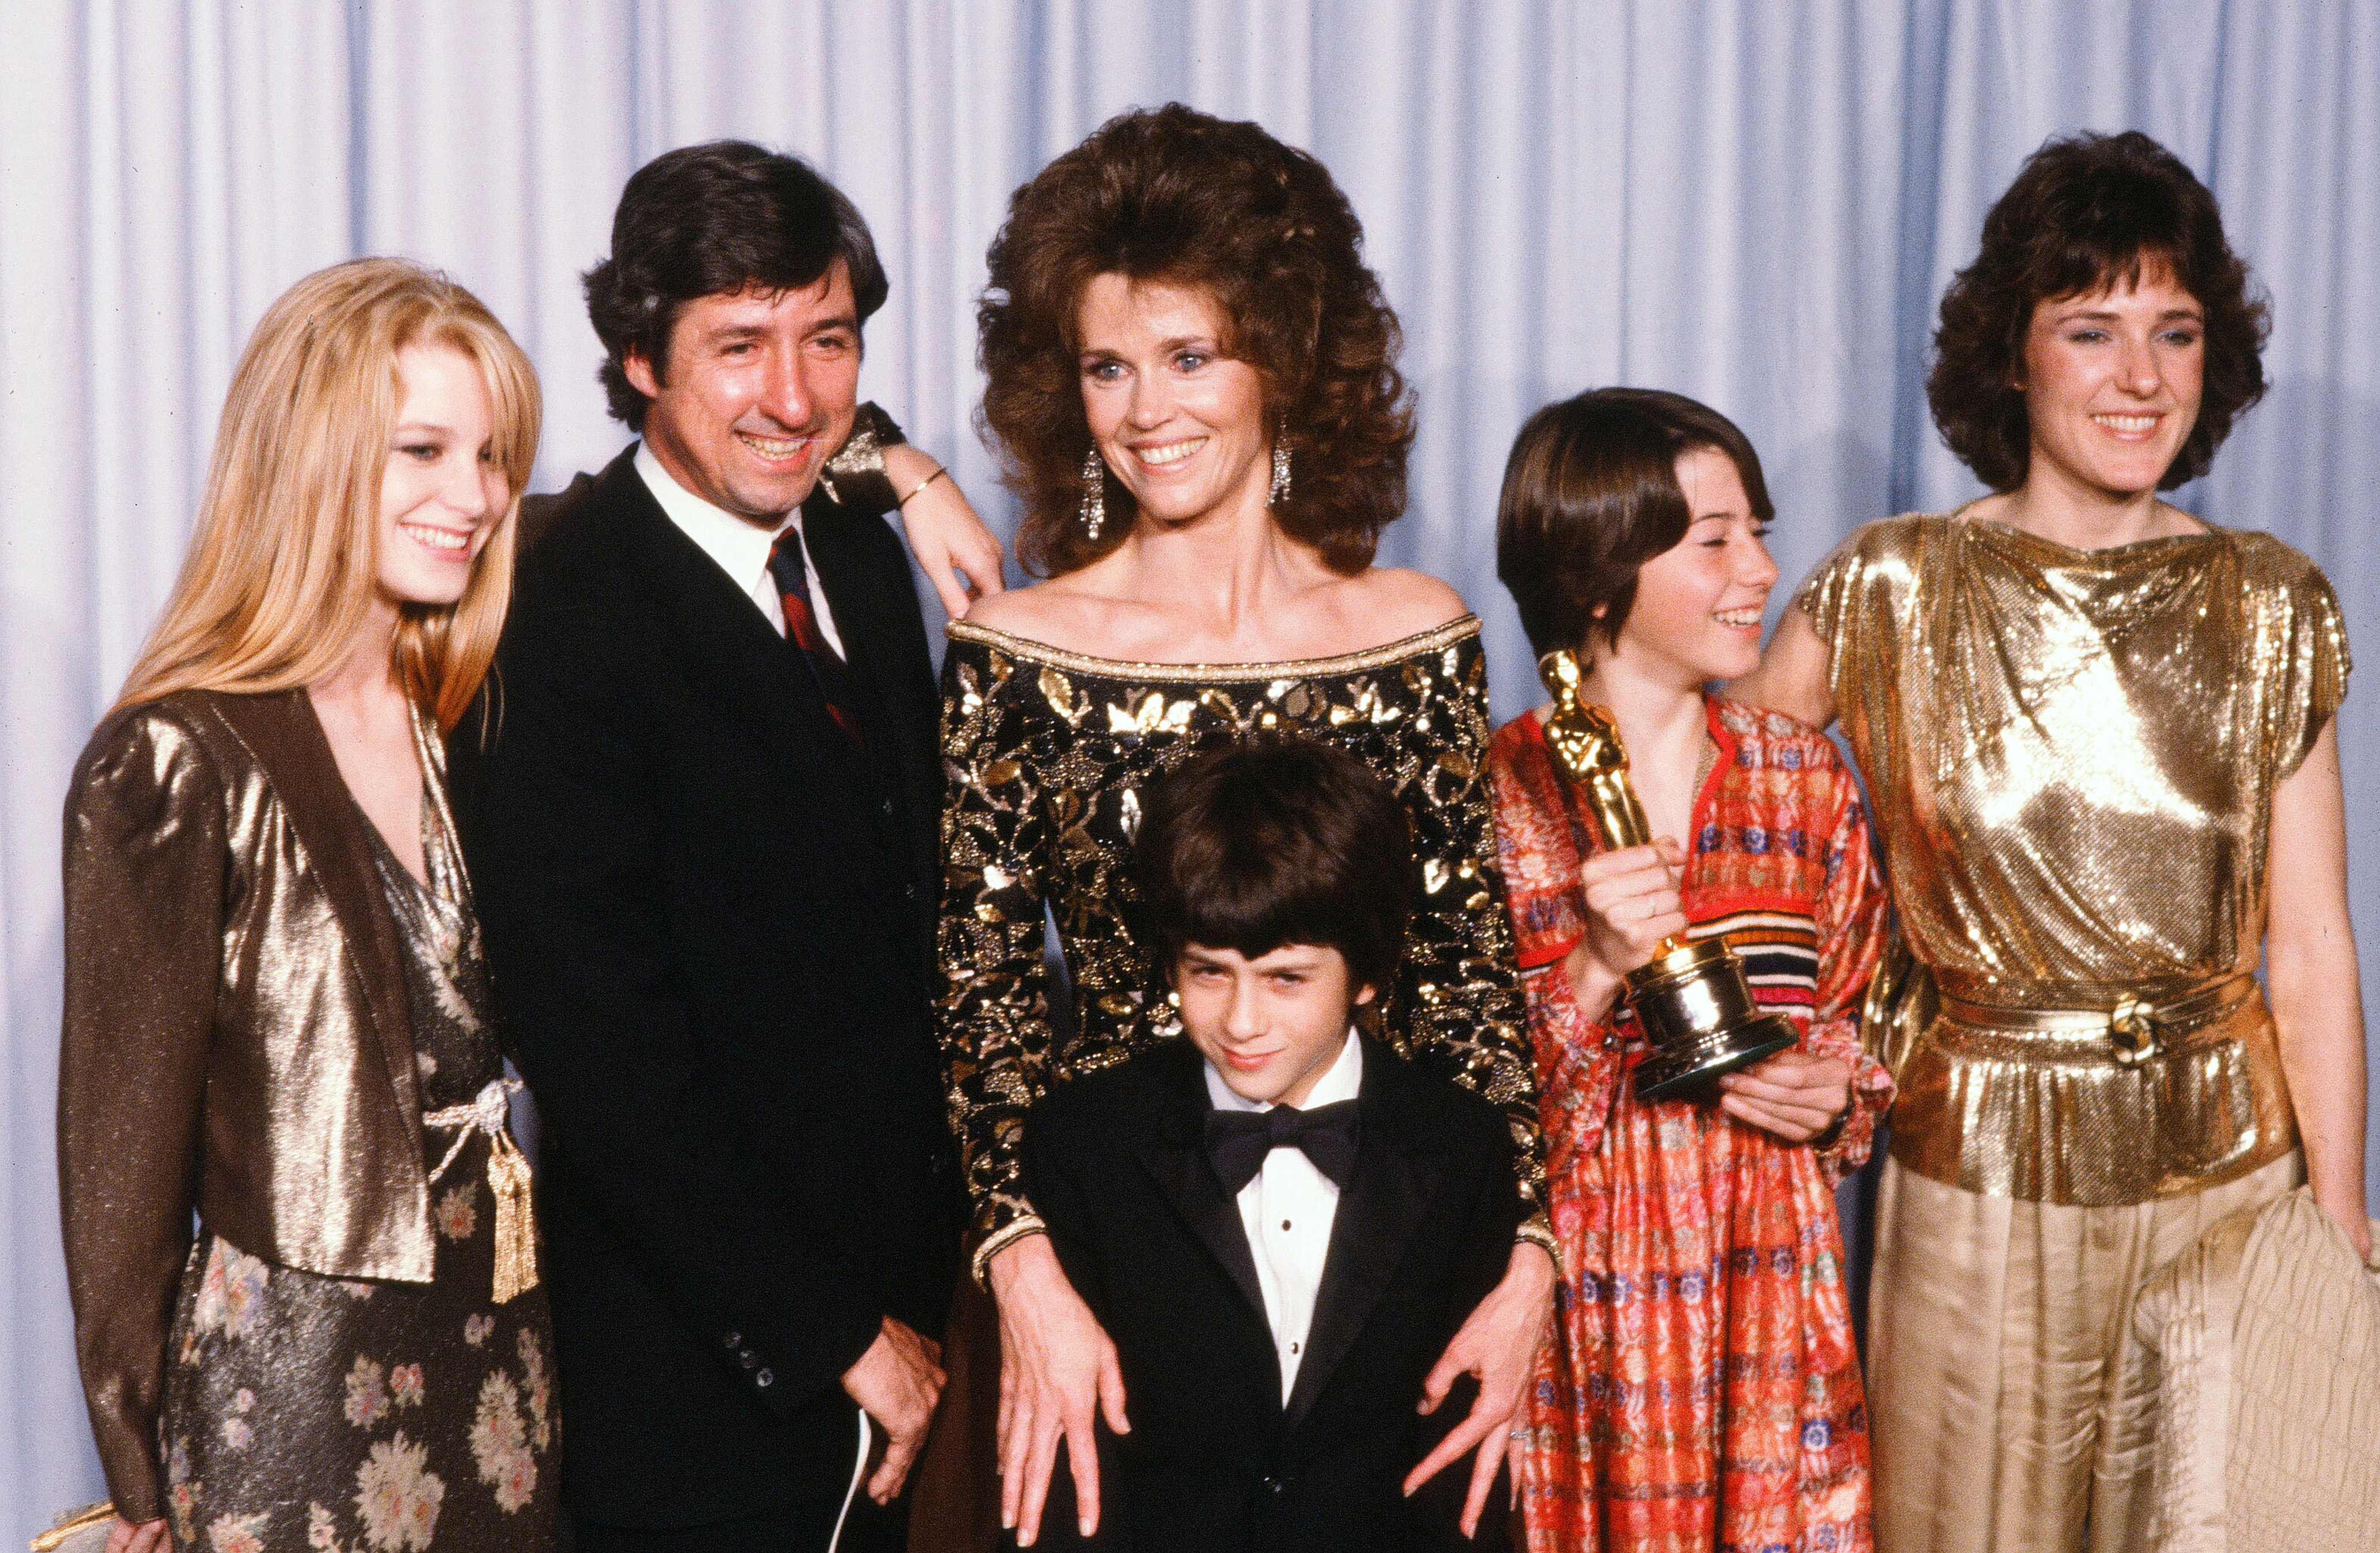 Actress Jane Fonda with husband Tom Hayden and family, Bridgette Fonda (L) ,Troy Garity, Vanessa Vadim and Amy Fonda (R) poses backstage after accepting her father Henry Fonda "Best Actor" award during the 54th Academy Awards at Dorothy Chandler Pavilion in Los Angeles. | Source: Getty Images